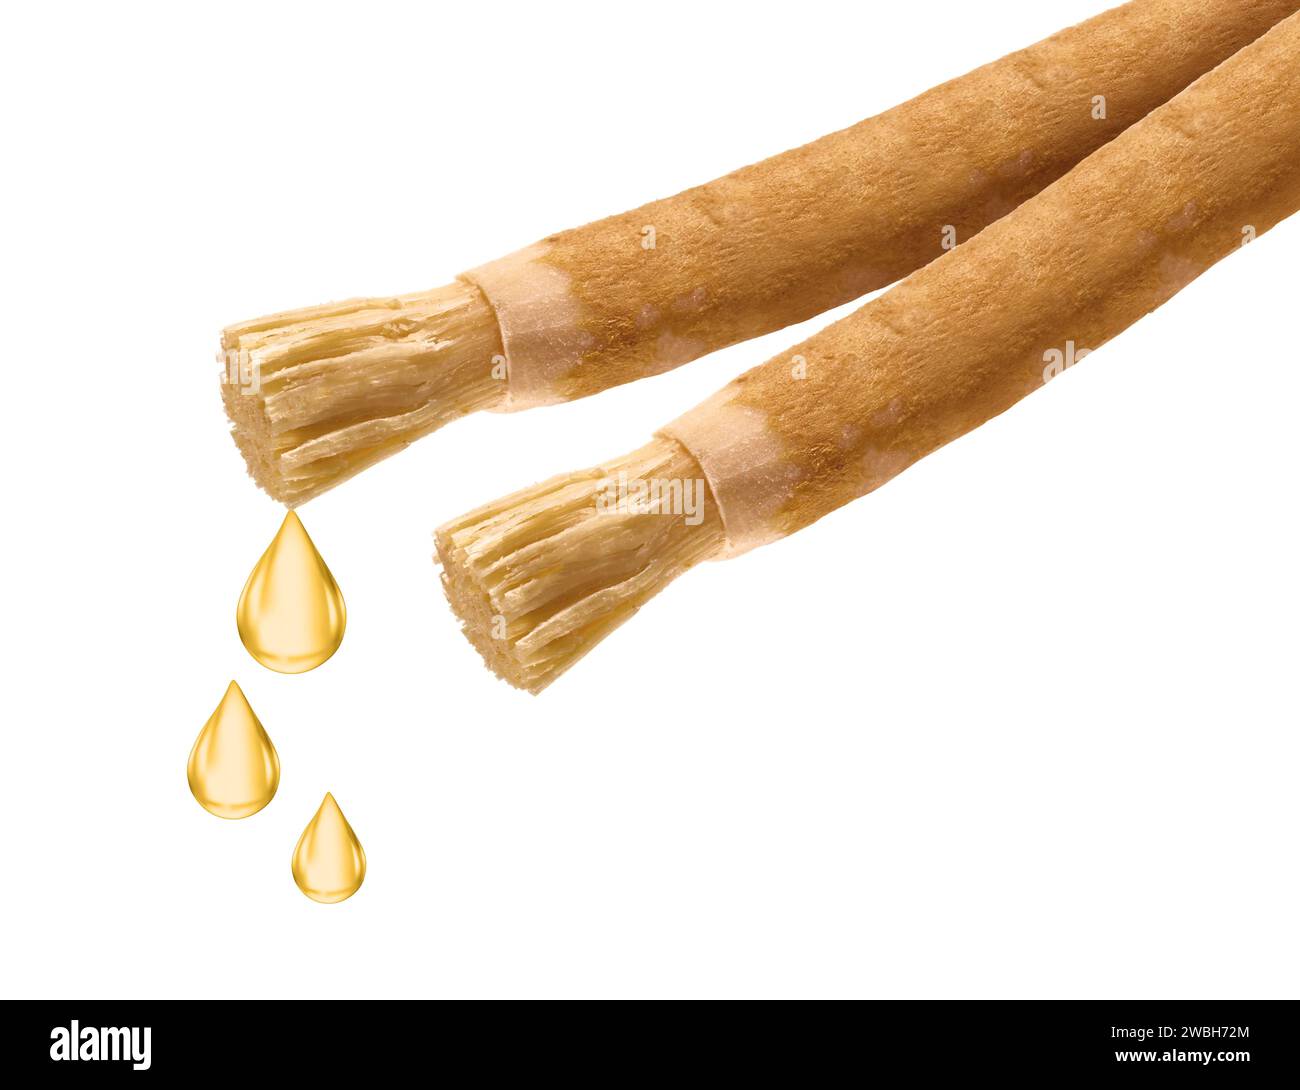 Old Islamic Traditional Natural Toothbrush Miswak Or Siwak Stock